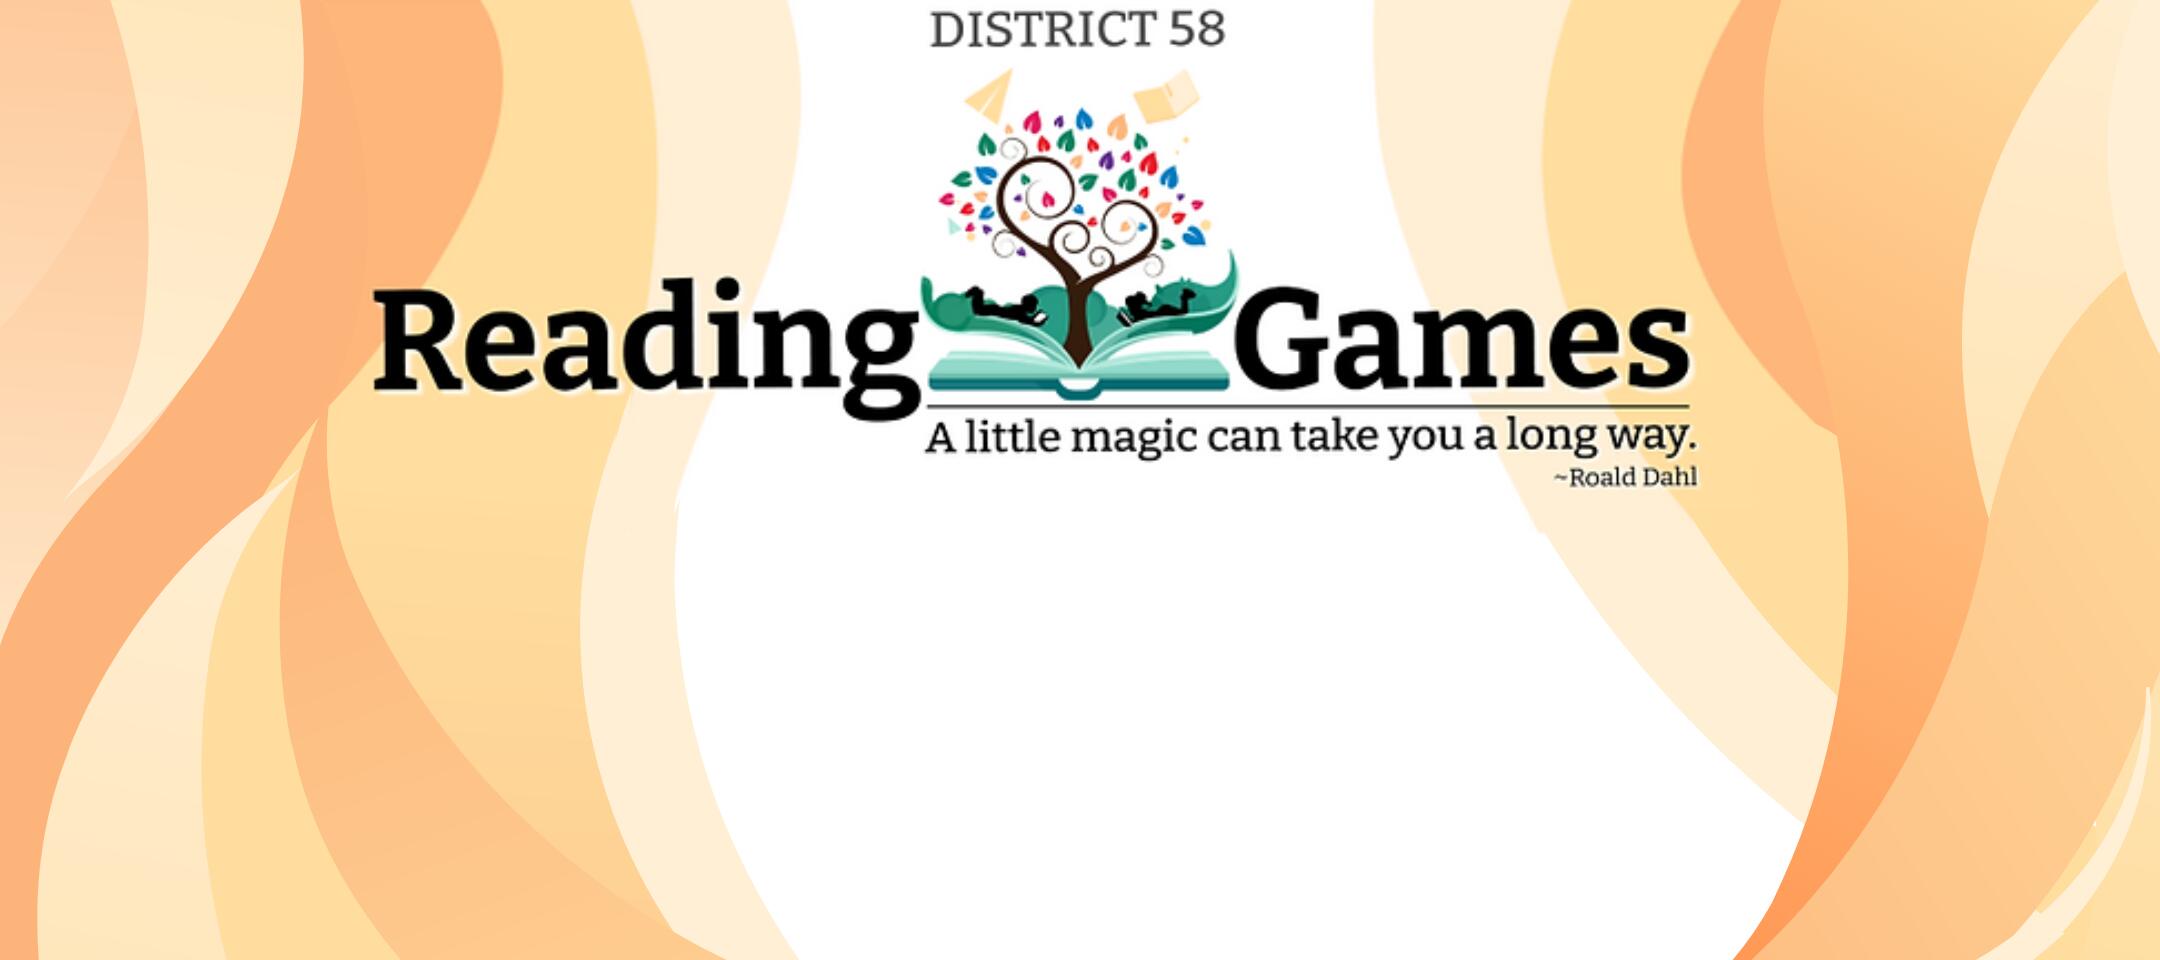 The Reading Games are Back!